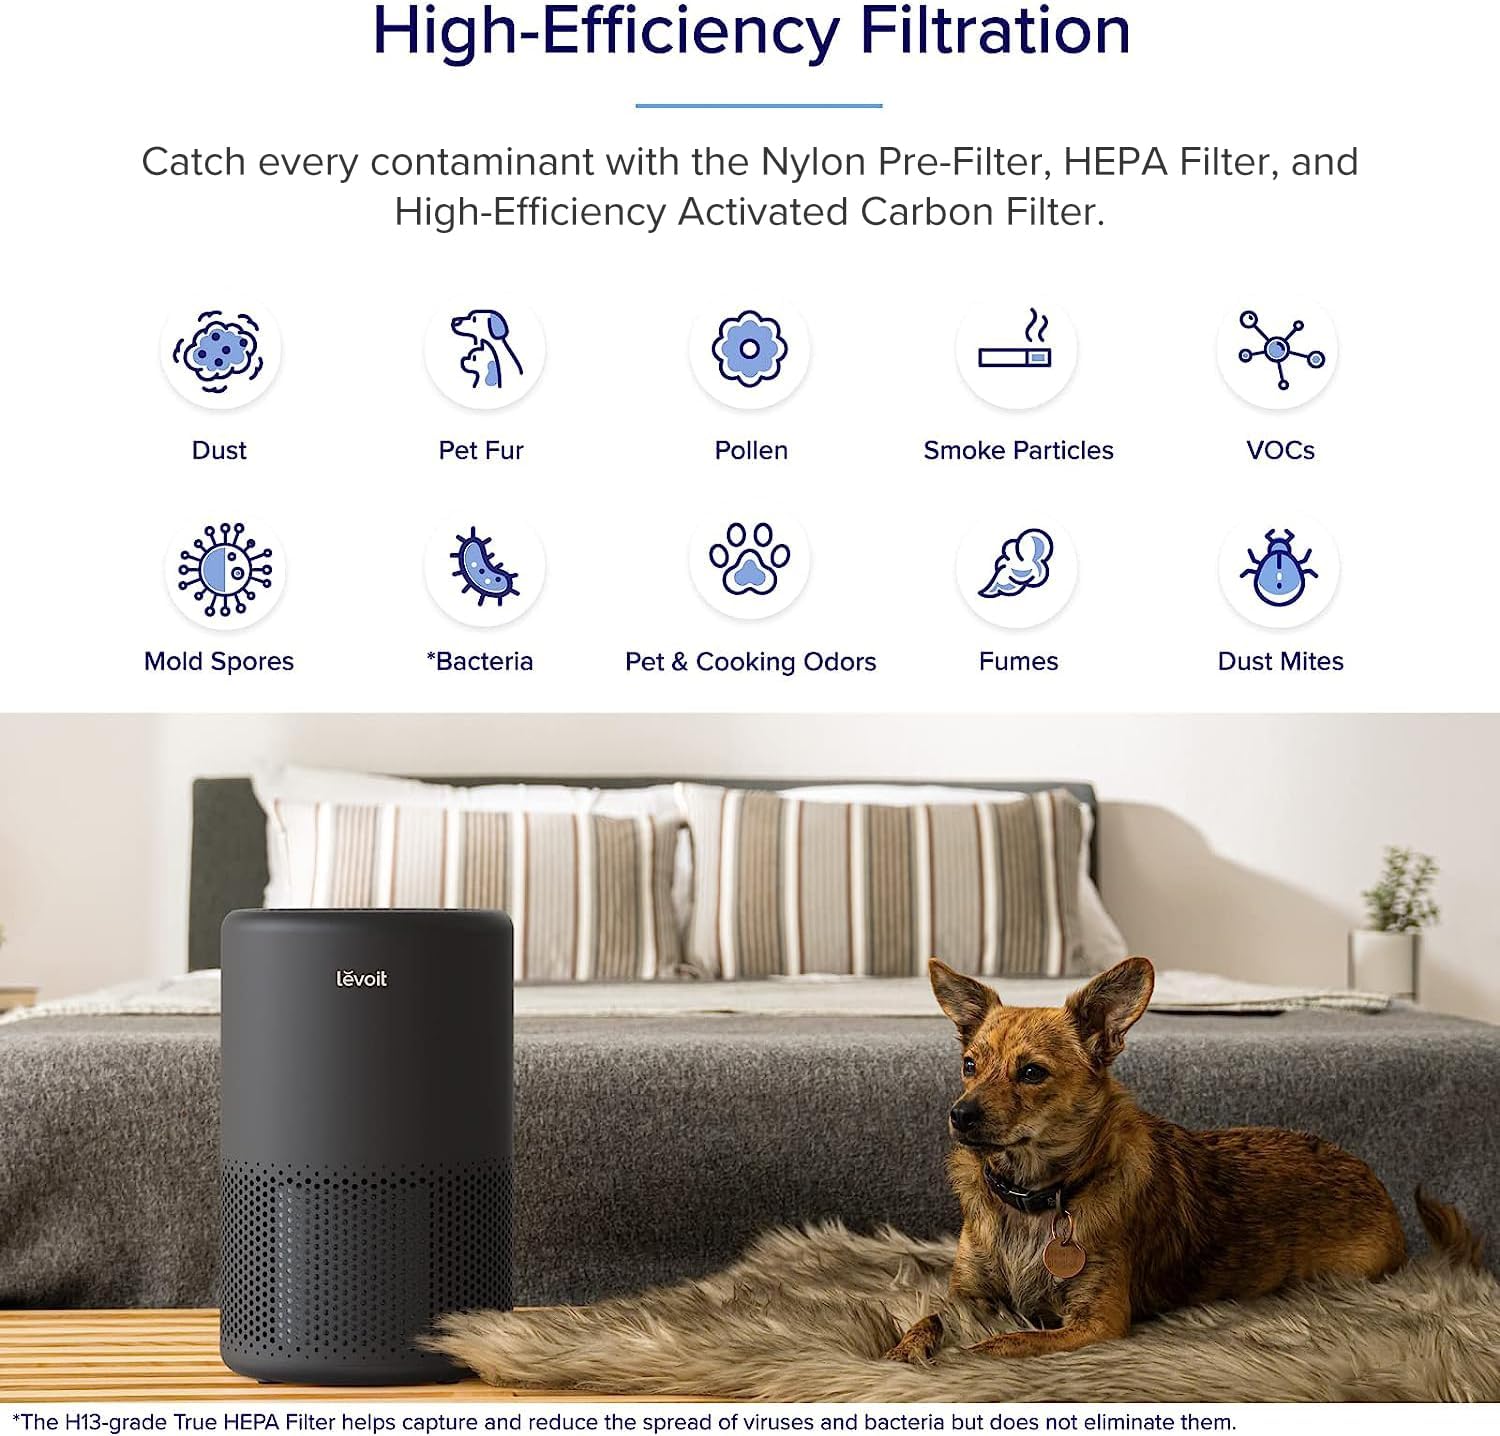 LEVOIT Air Purifier for Home Bedroom, HEPA  